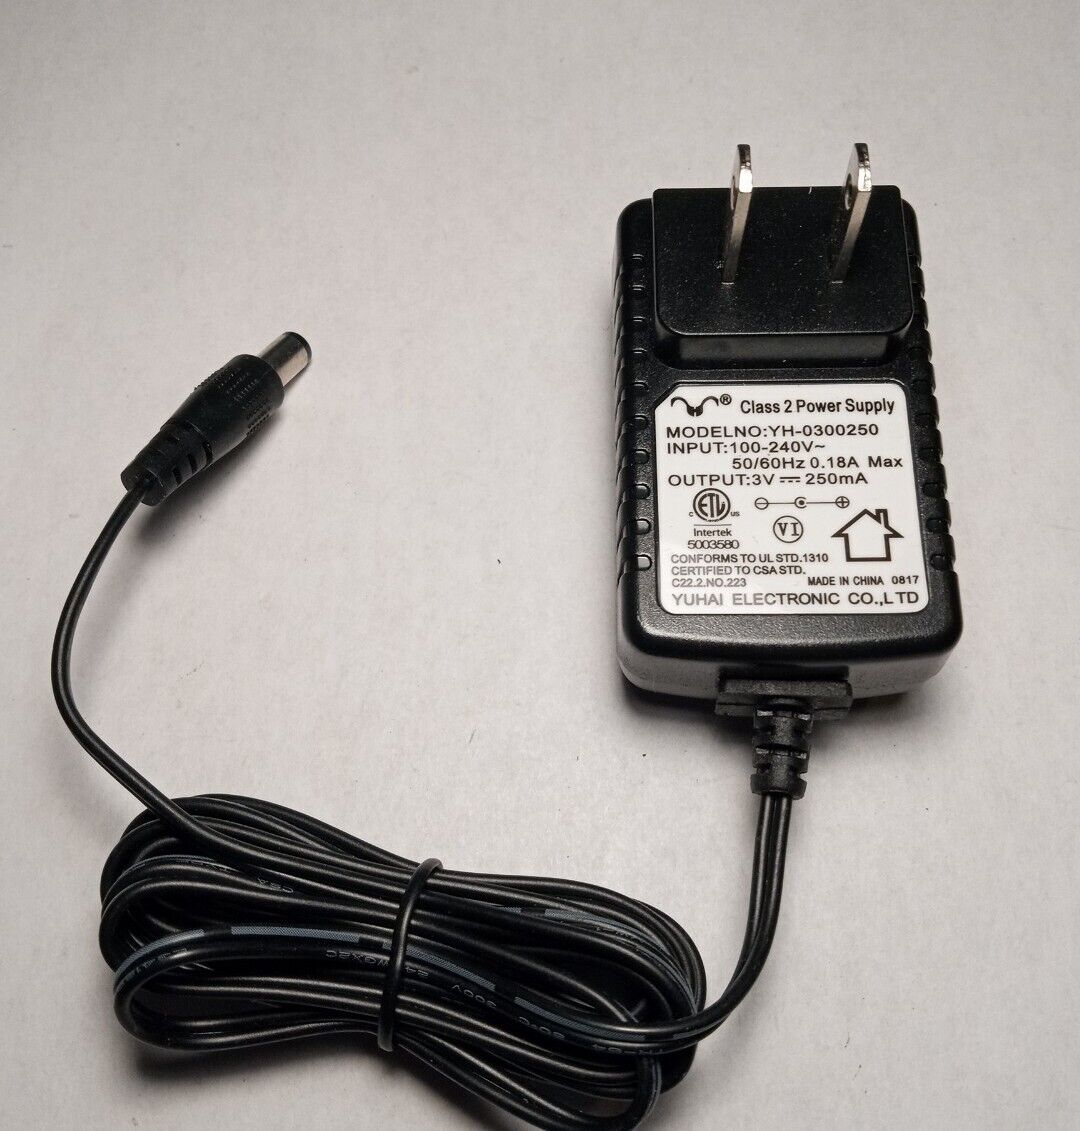 Yuhai Electronic AC Adaptor Class 2 Power Supply YH-0300250 3V 2500mA Brand: Yuhai Type: AC/DC Adapter Connector - Click Image to Close